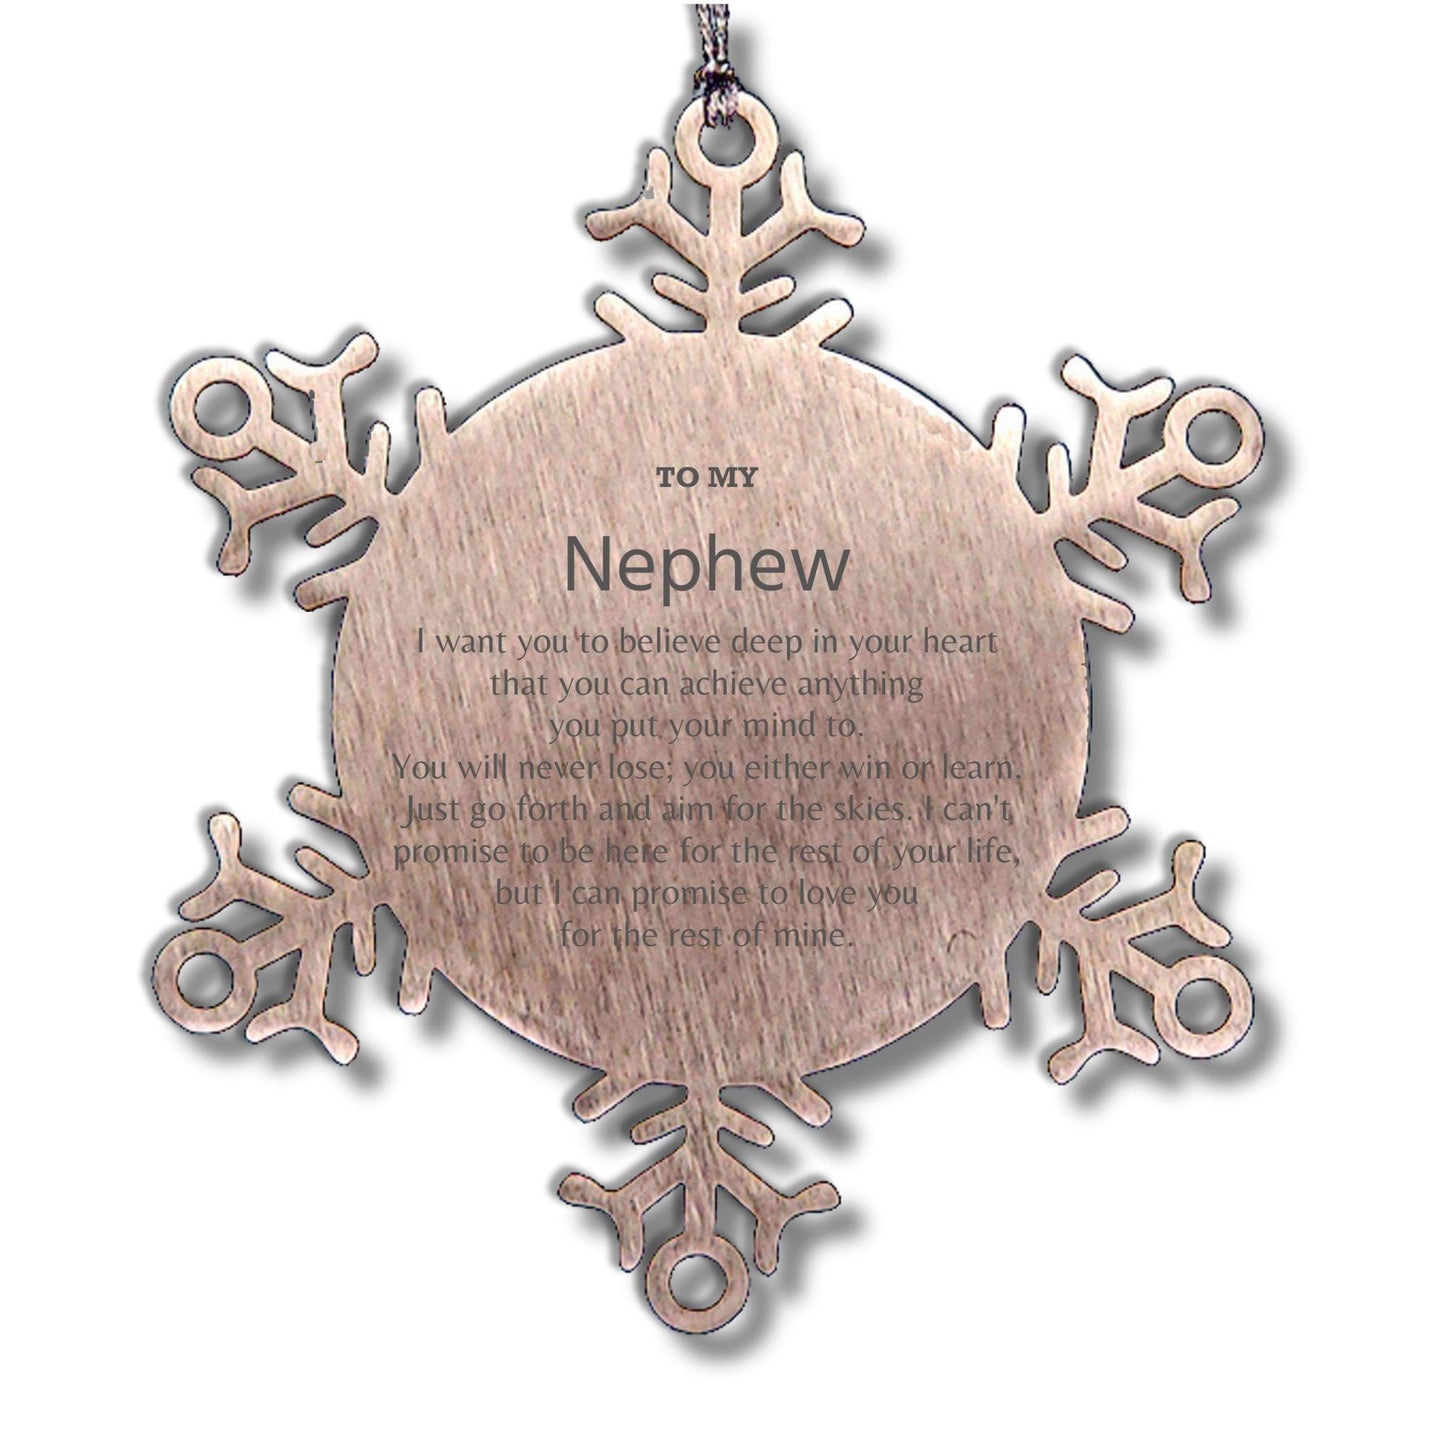 Motivational Nephew Snowflake Ornament, Nephew I can promise to love you for the rest of mine, Christmas Birthday Gift - Mallard Moon Gift Shop